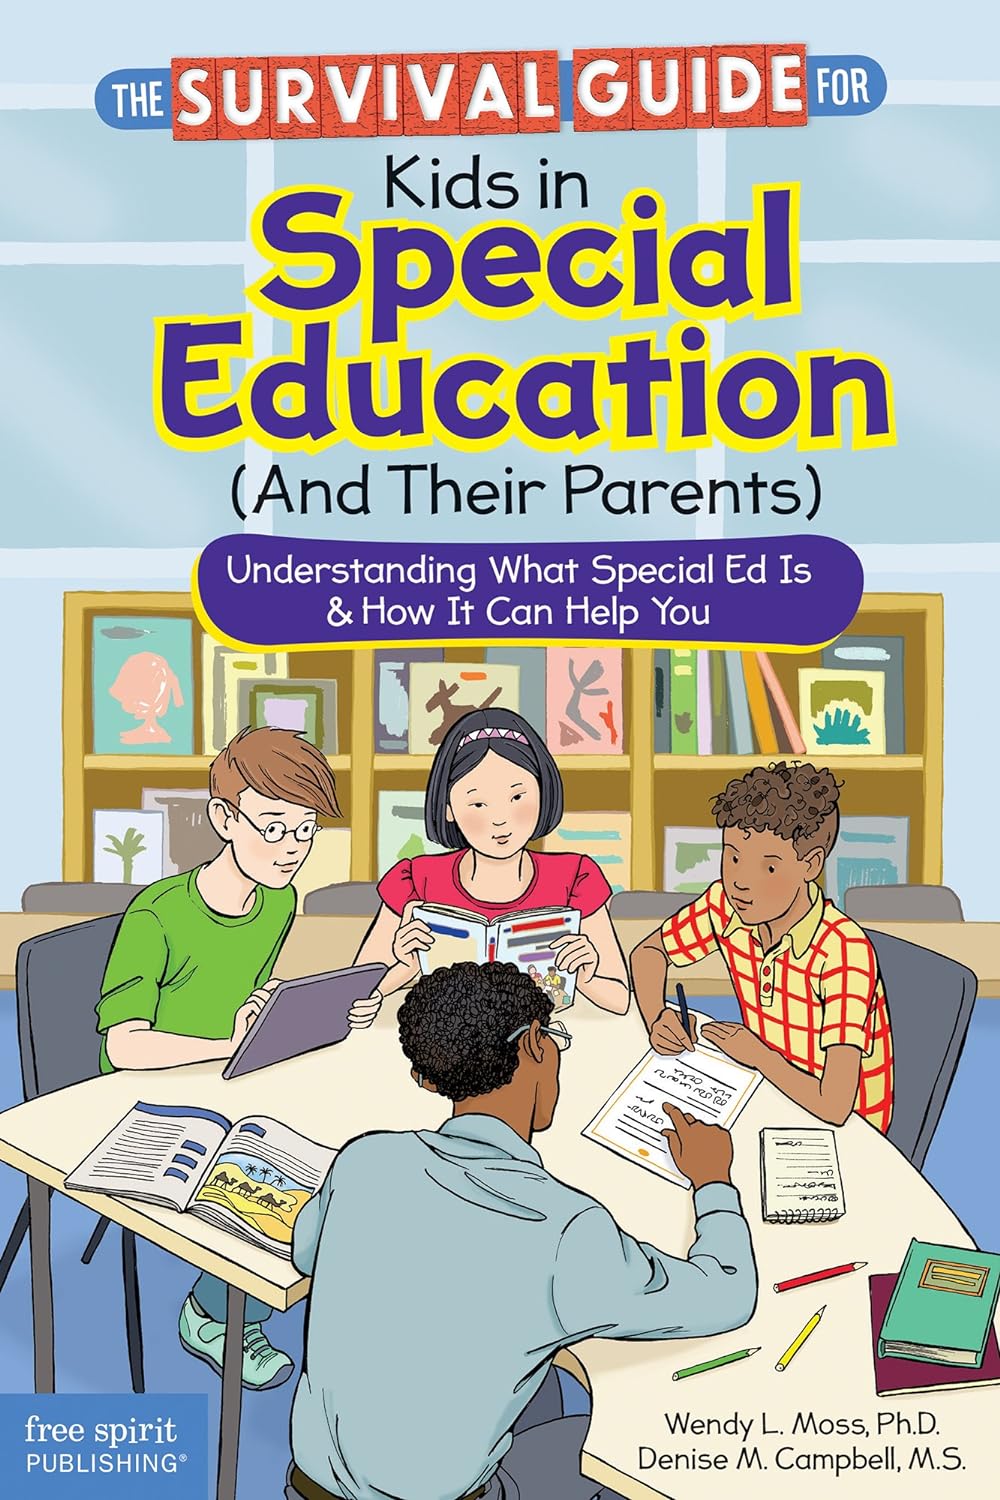 Survival Guide for Kids in Special Education (And Their Parents): Understanding What Special Ed Is & How It Can Help You